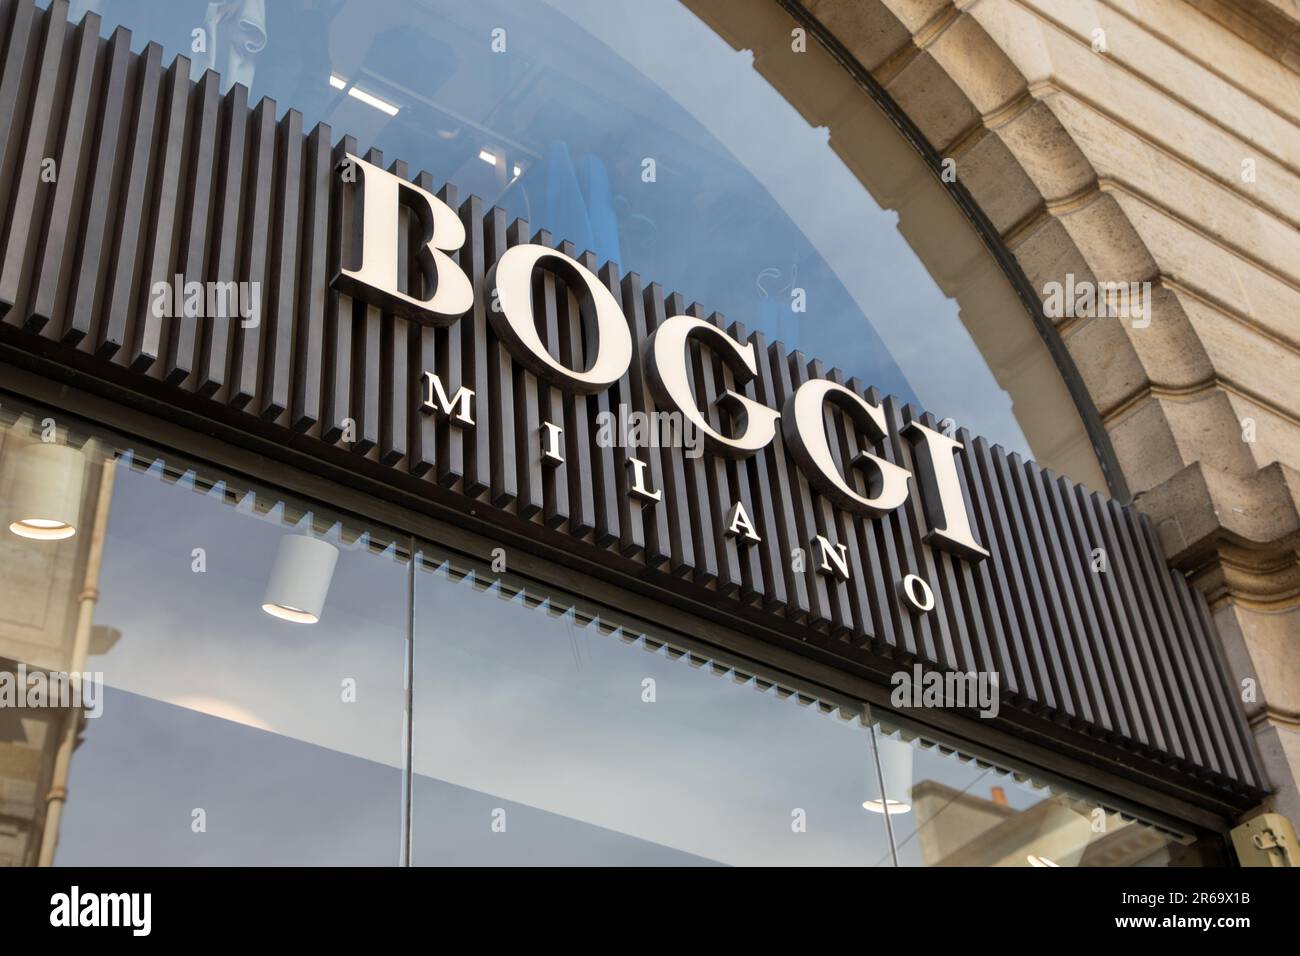 Bordeaux , Aquitaine France - 06 06 2023 : Boggi milano logo chain facade  and text sign shop of italian fashion store brand for men suits Stock Photo  - Alamy